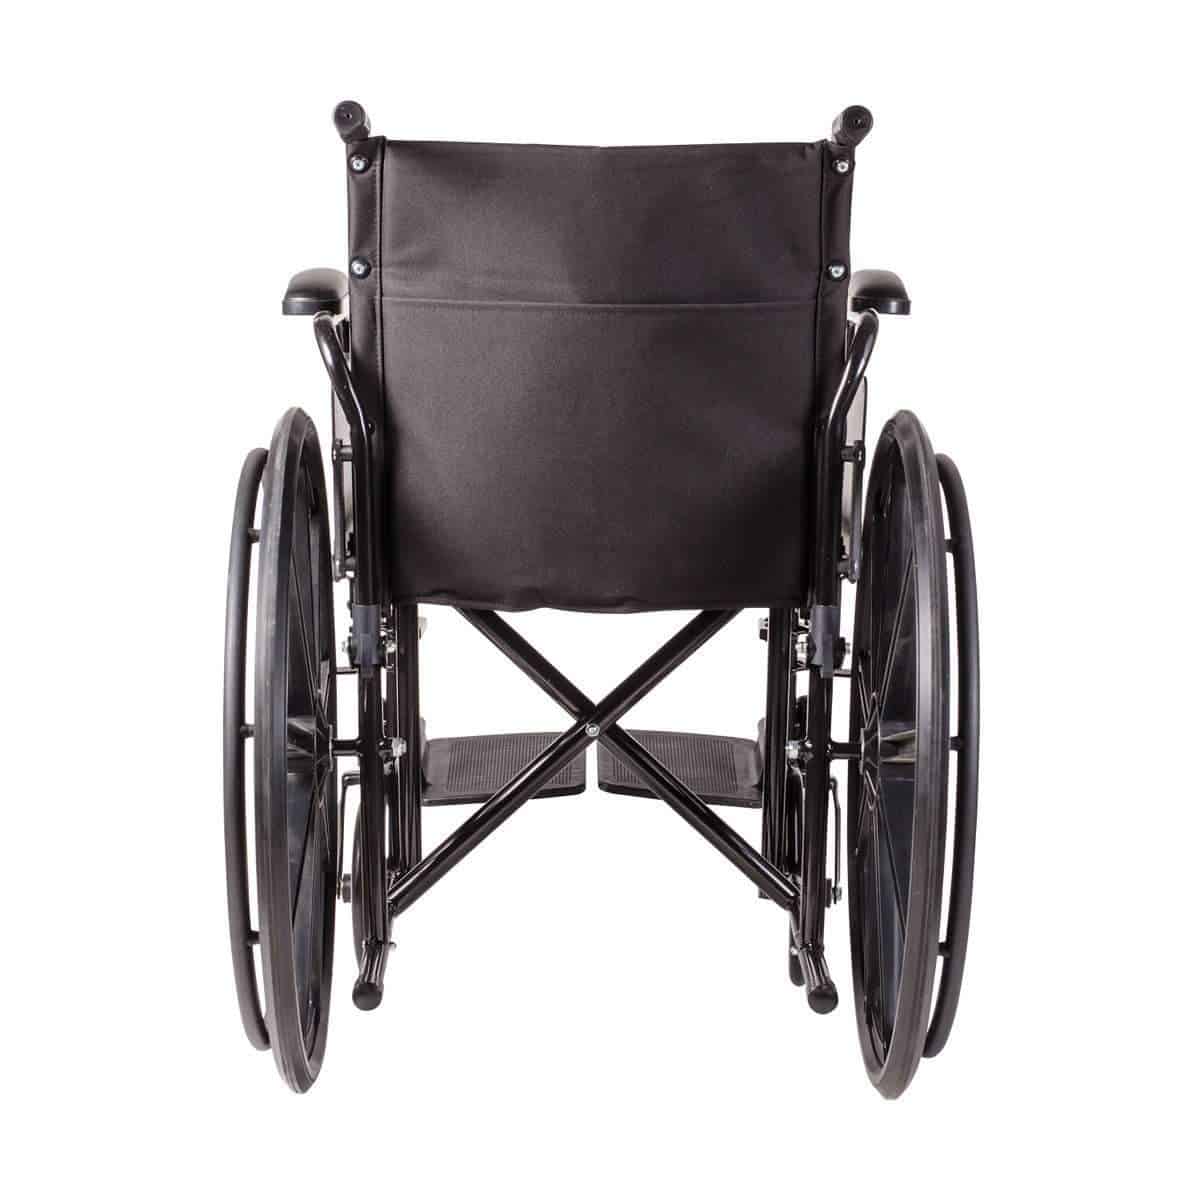 DMI Lightweight Foldable Wheelchairs with Padded Armrests - 18" Seat Width - Senior.com Wheelchairs